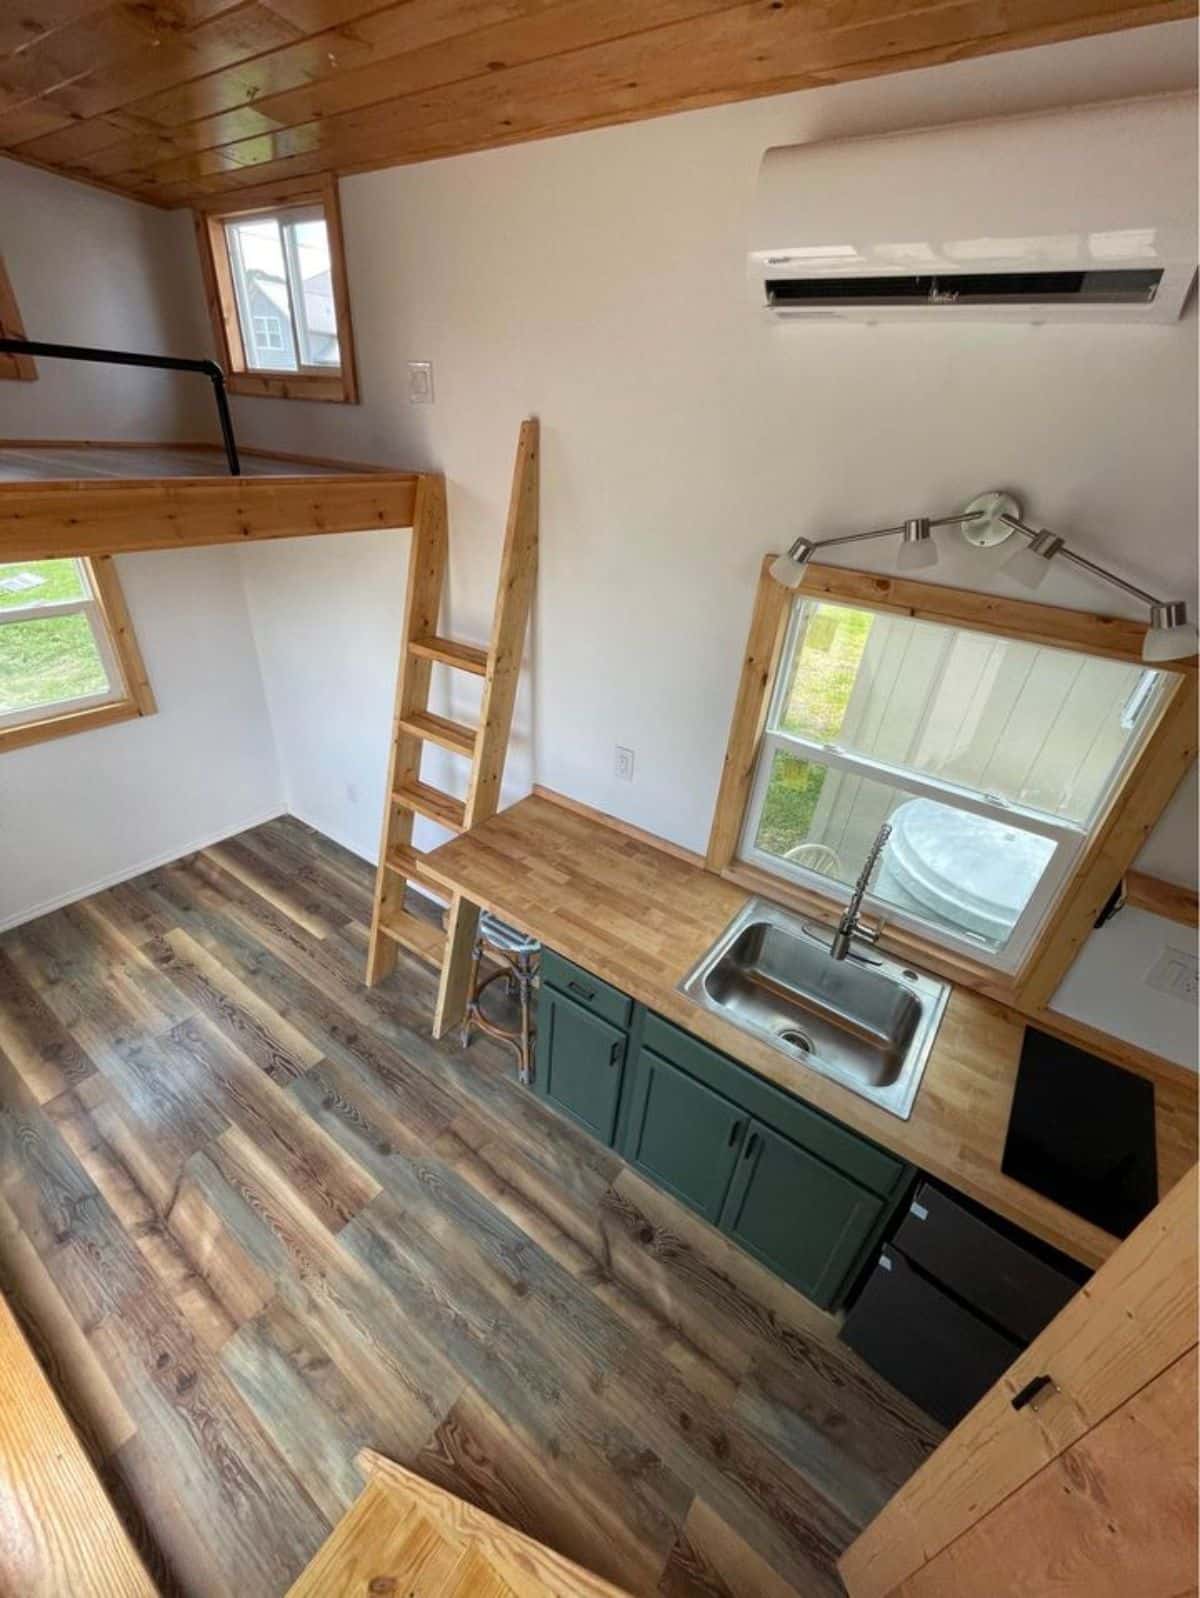 Overall wooden interiors with waterproof laminated flooring of 20' Towable Tiny Home